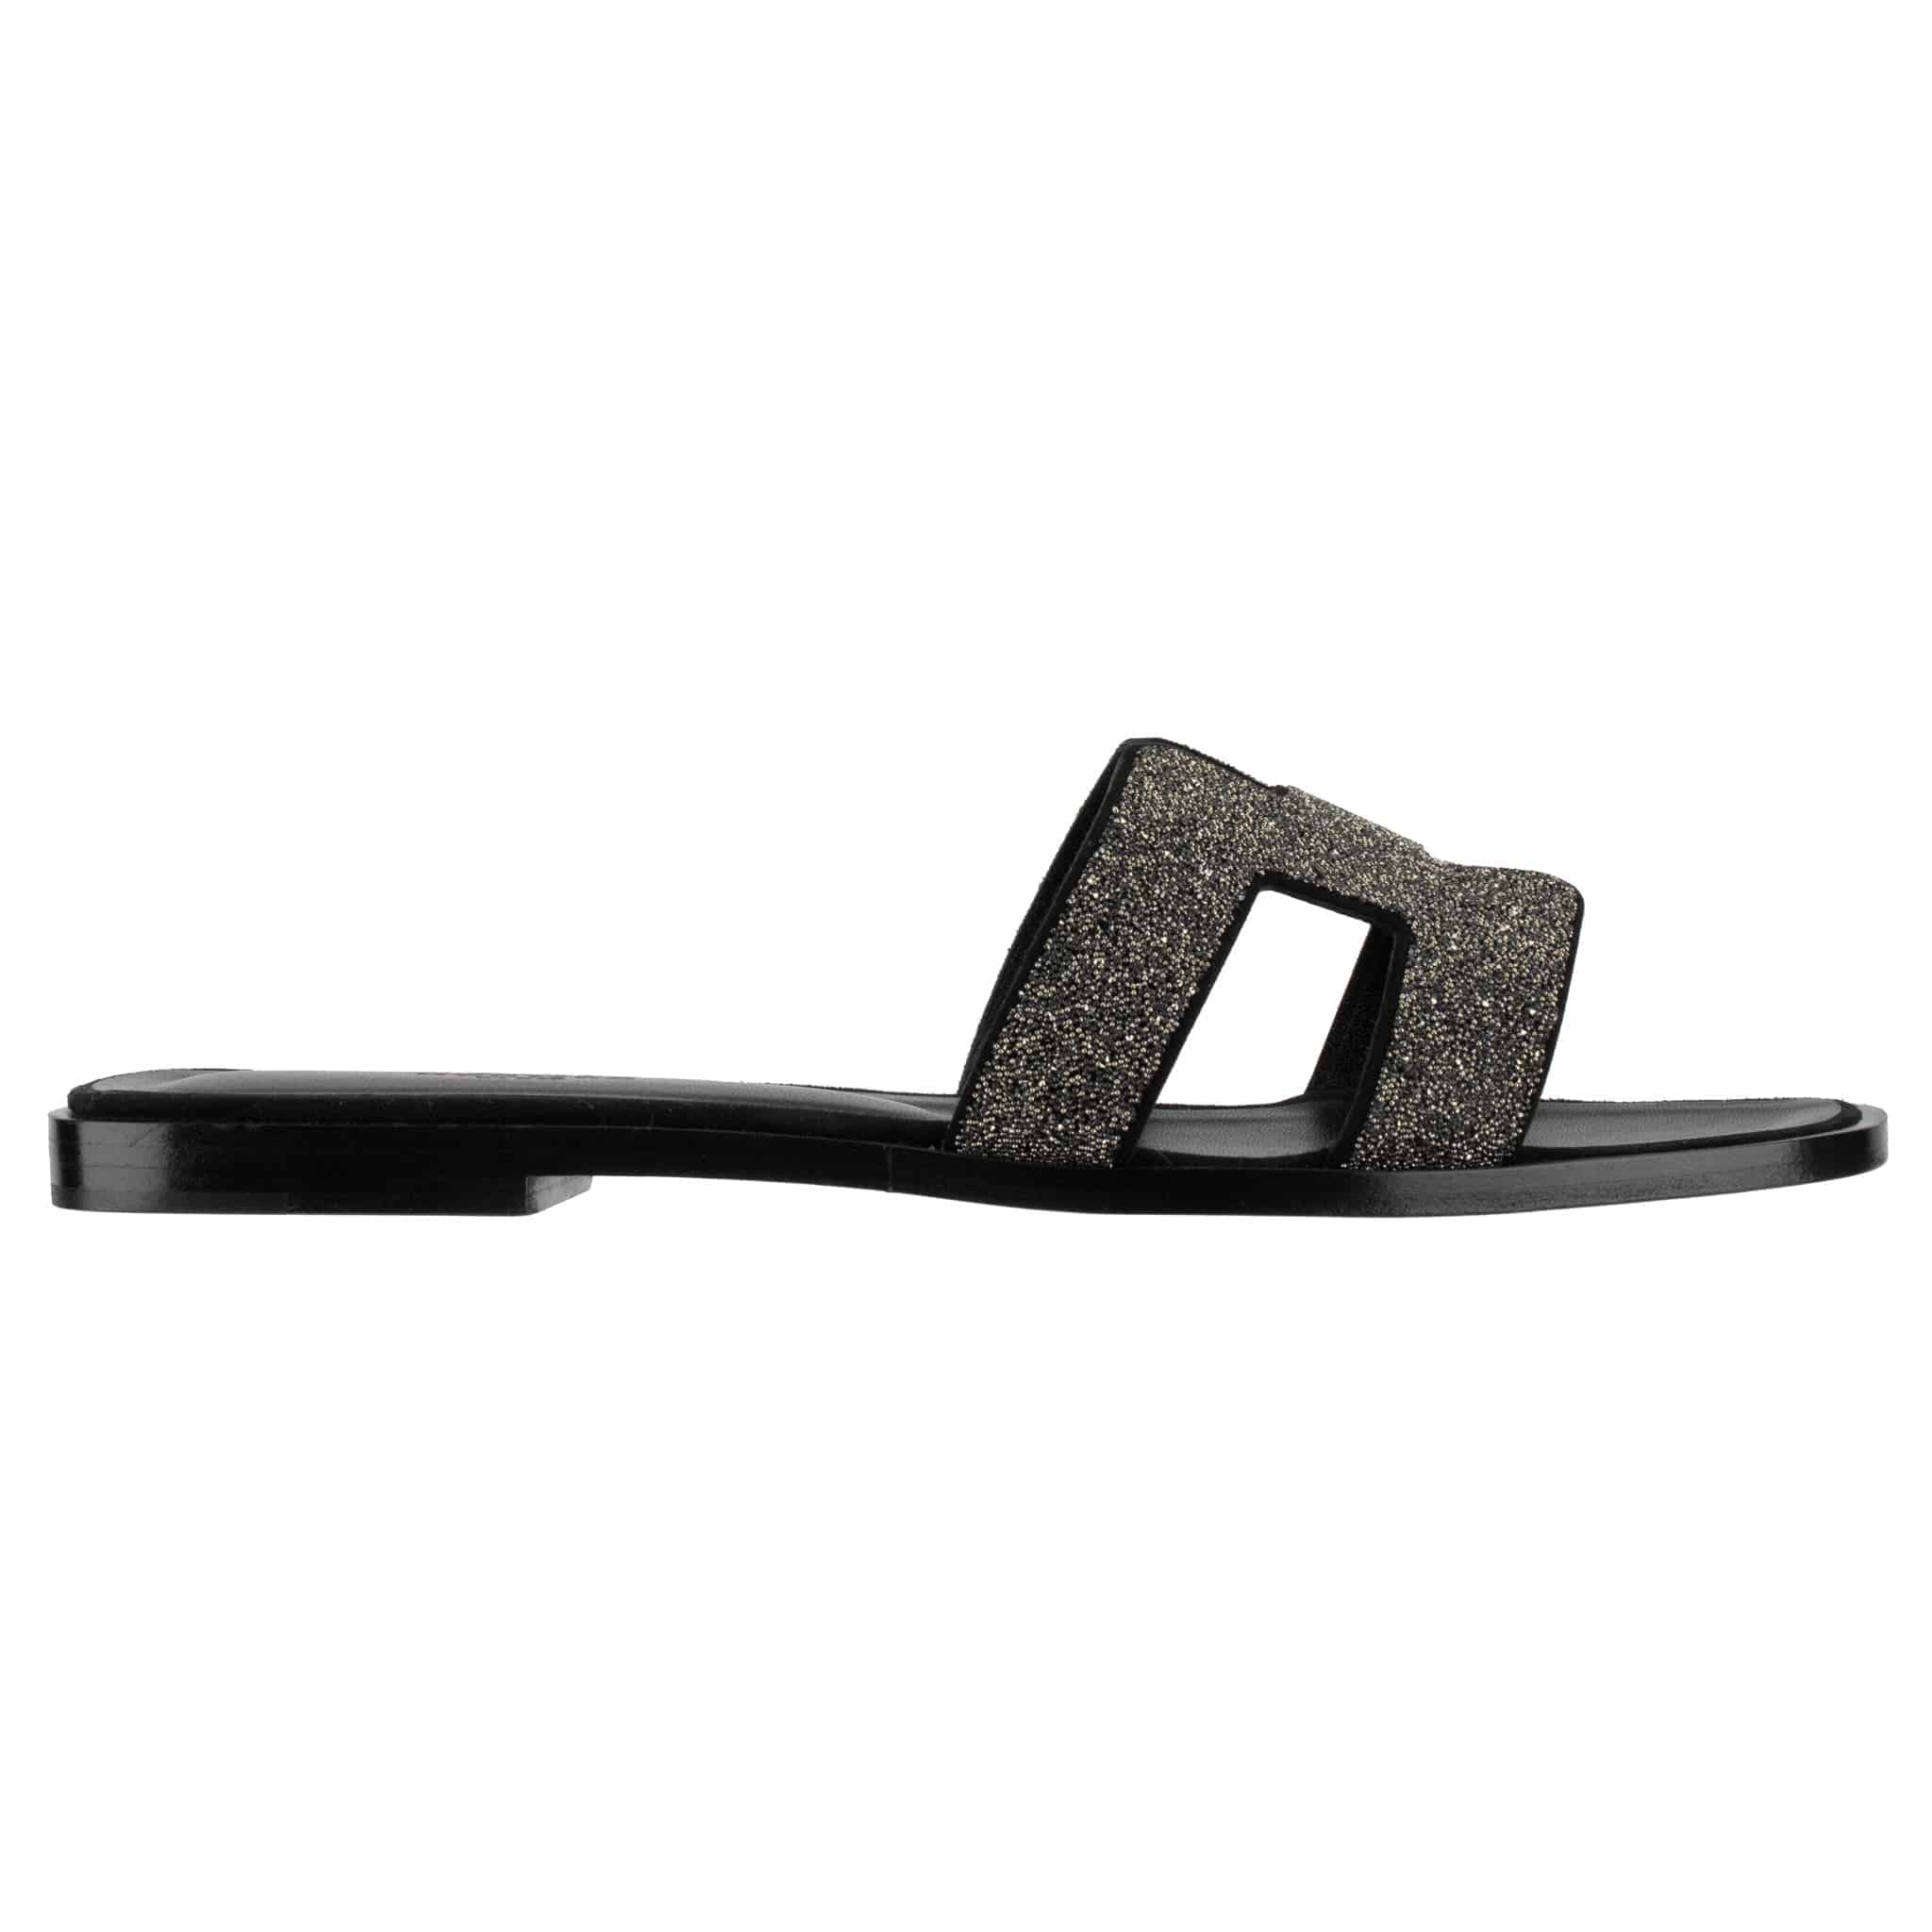 HERMES ORAN SANDAL BLACK SMOOTH LEATHER WITH CRYSTAL DETAILS 38 FR - On Repeat